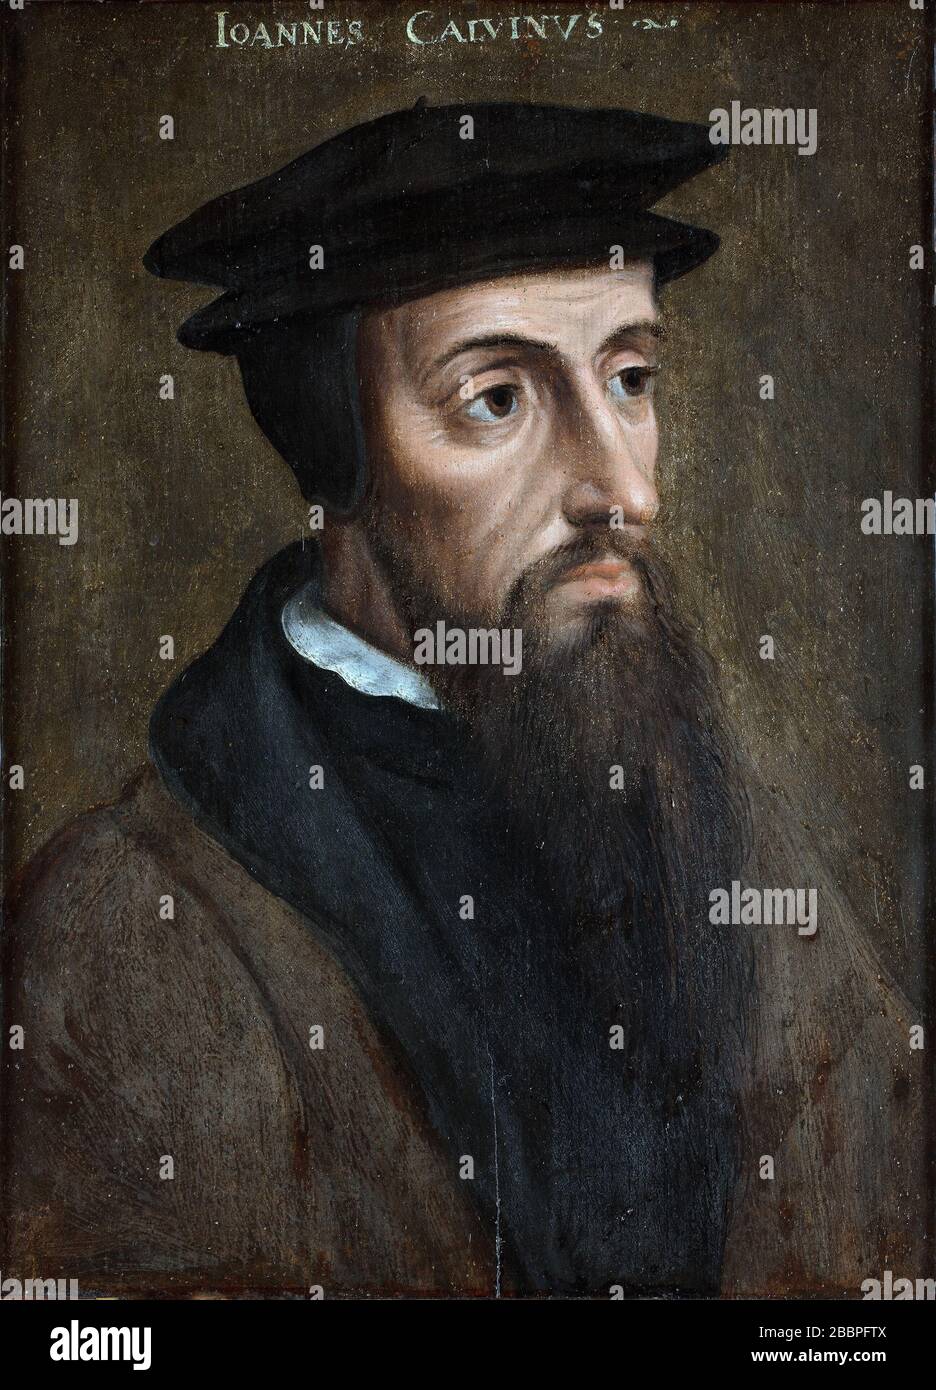 JOHN CALVIN (1509-1564) French Protestant theologian about 1550. Stock Photo